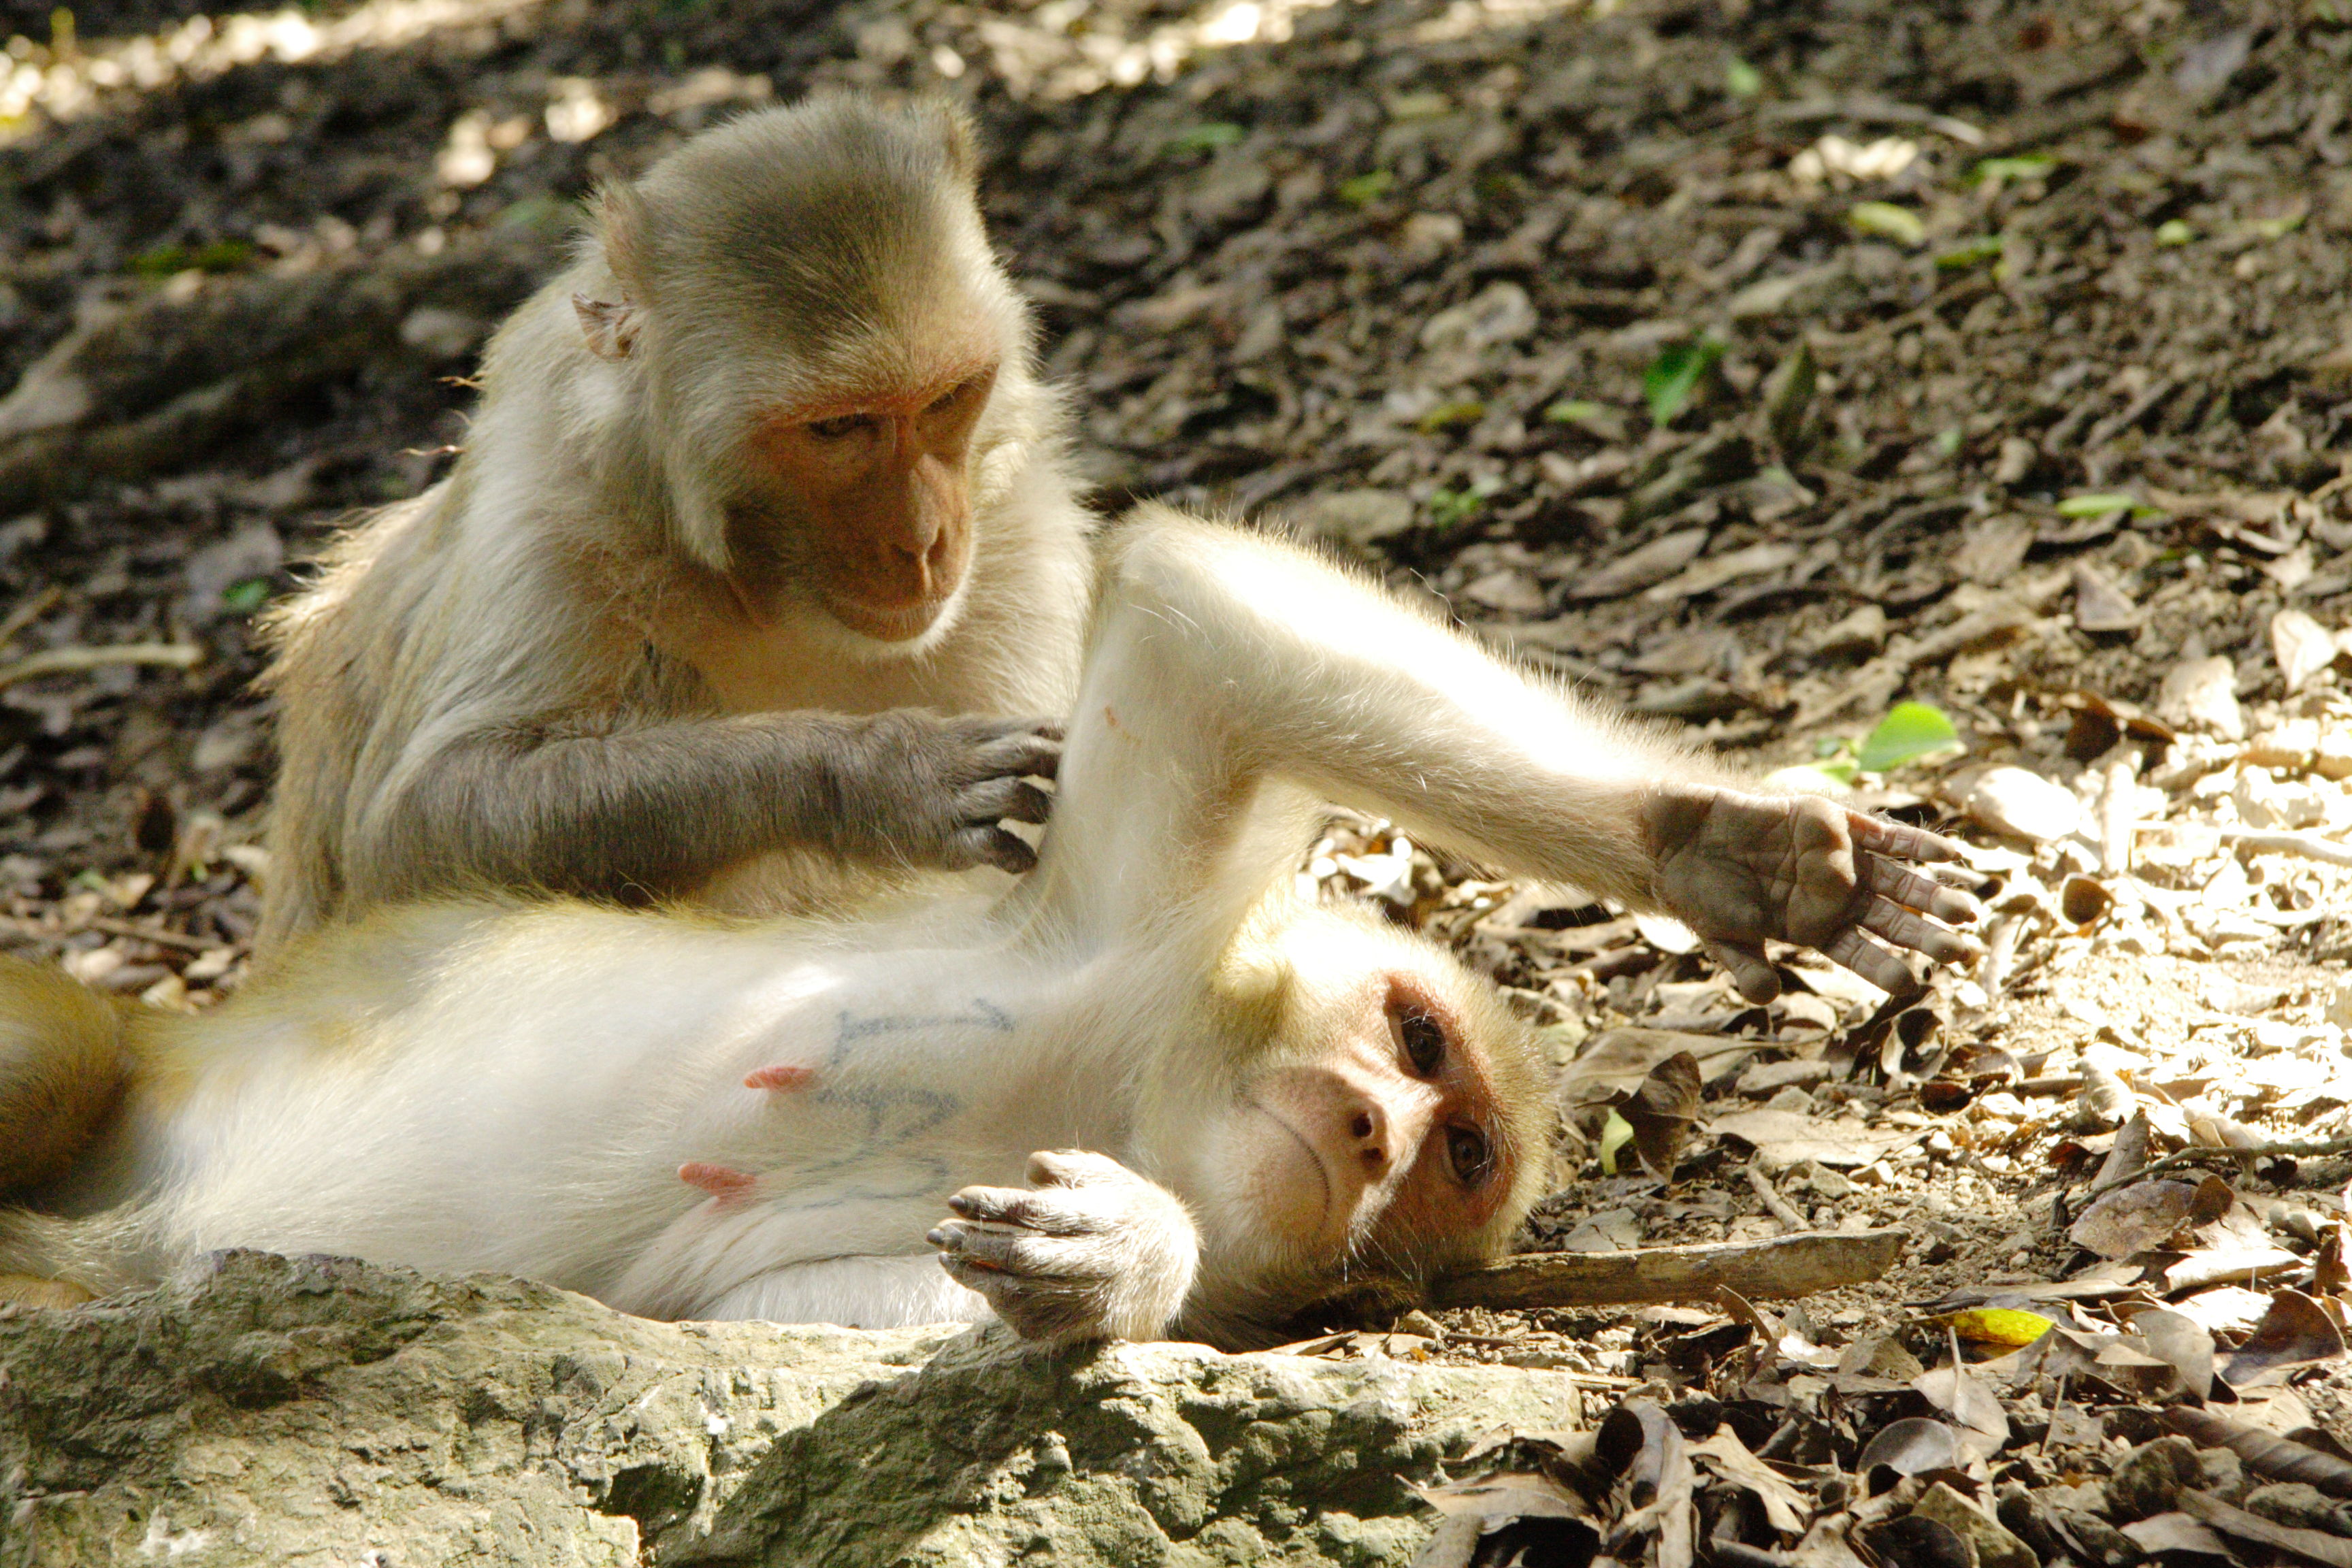 A pair of tannish colored monkeys. One is laying on the ground covered with leaves and rocks and sticks. The other is grooming the one laying down.